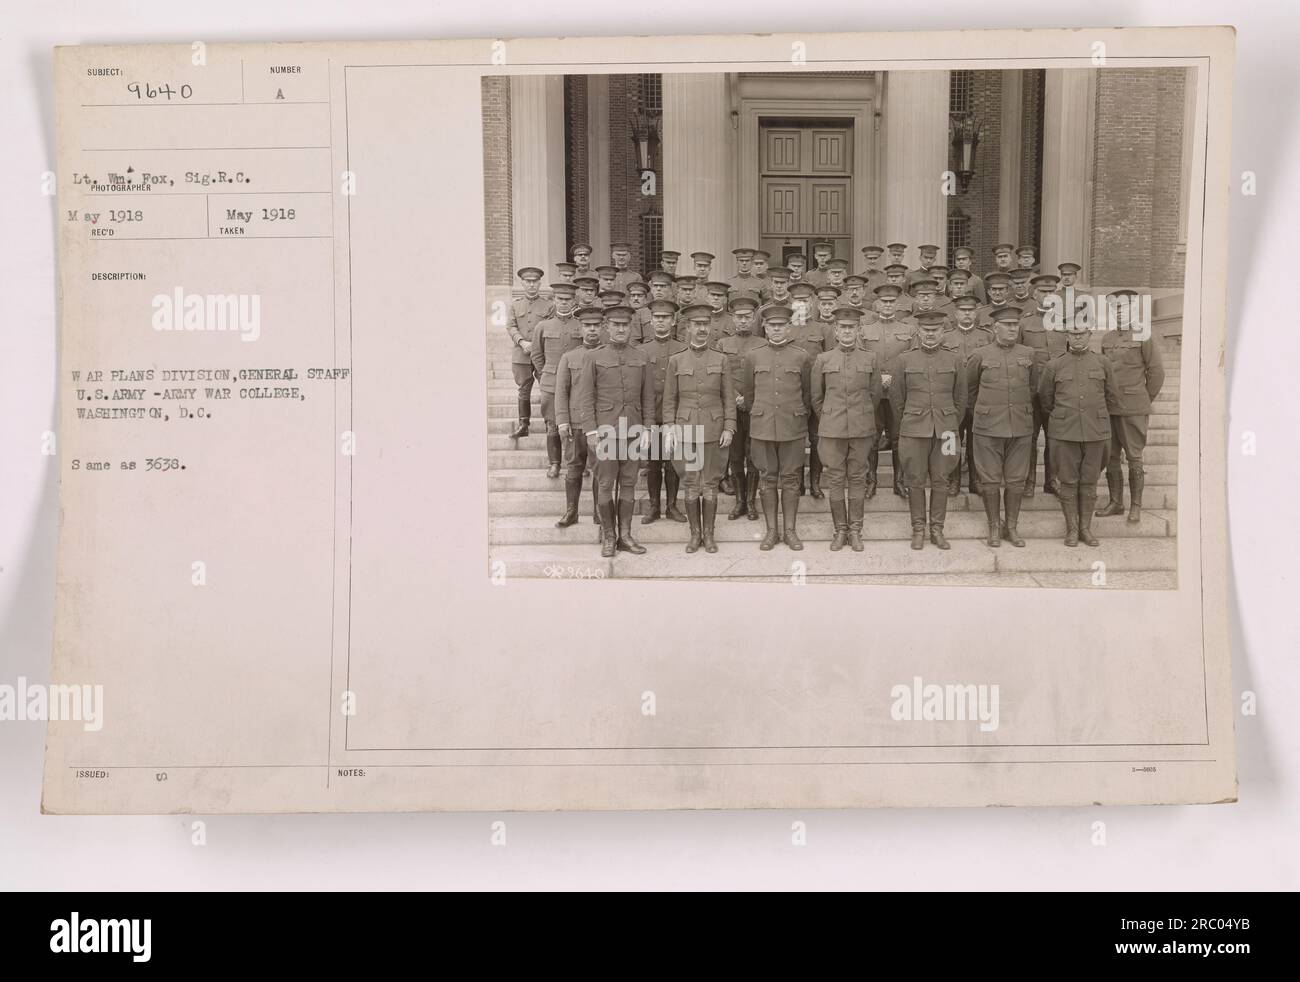 Image showing members of the War Plans Division, General Staff, U.S. Army, at the Army War College in Washington, D.C. The photograph was taken by Lieutenant Fox, Sig.R.C in May 1918. The photo is labeled as 111-SC-9640 and is also referred to as 3638. It depicts individuals taking notes during a meeting. Stock Photo